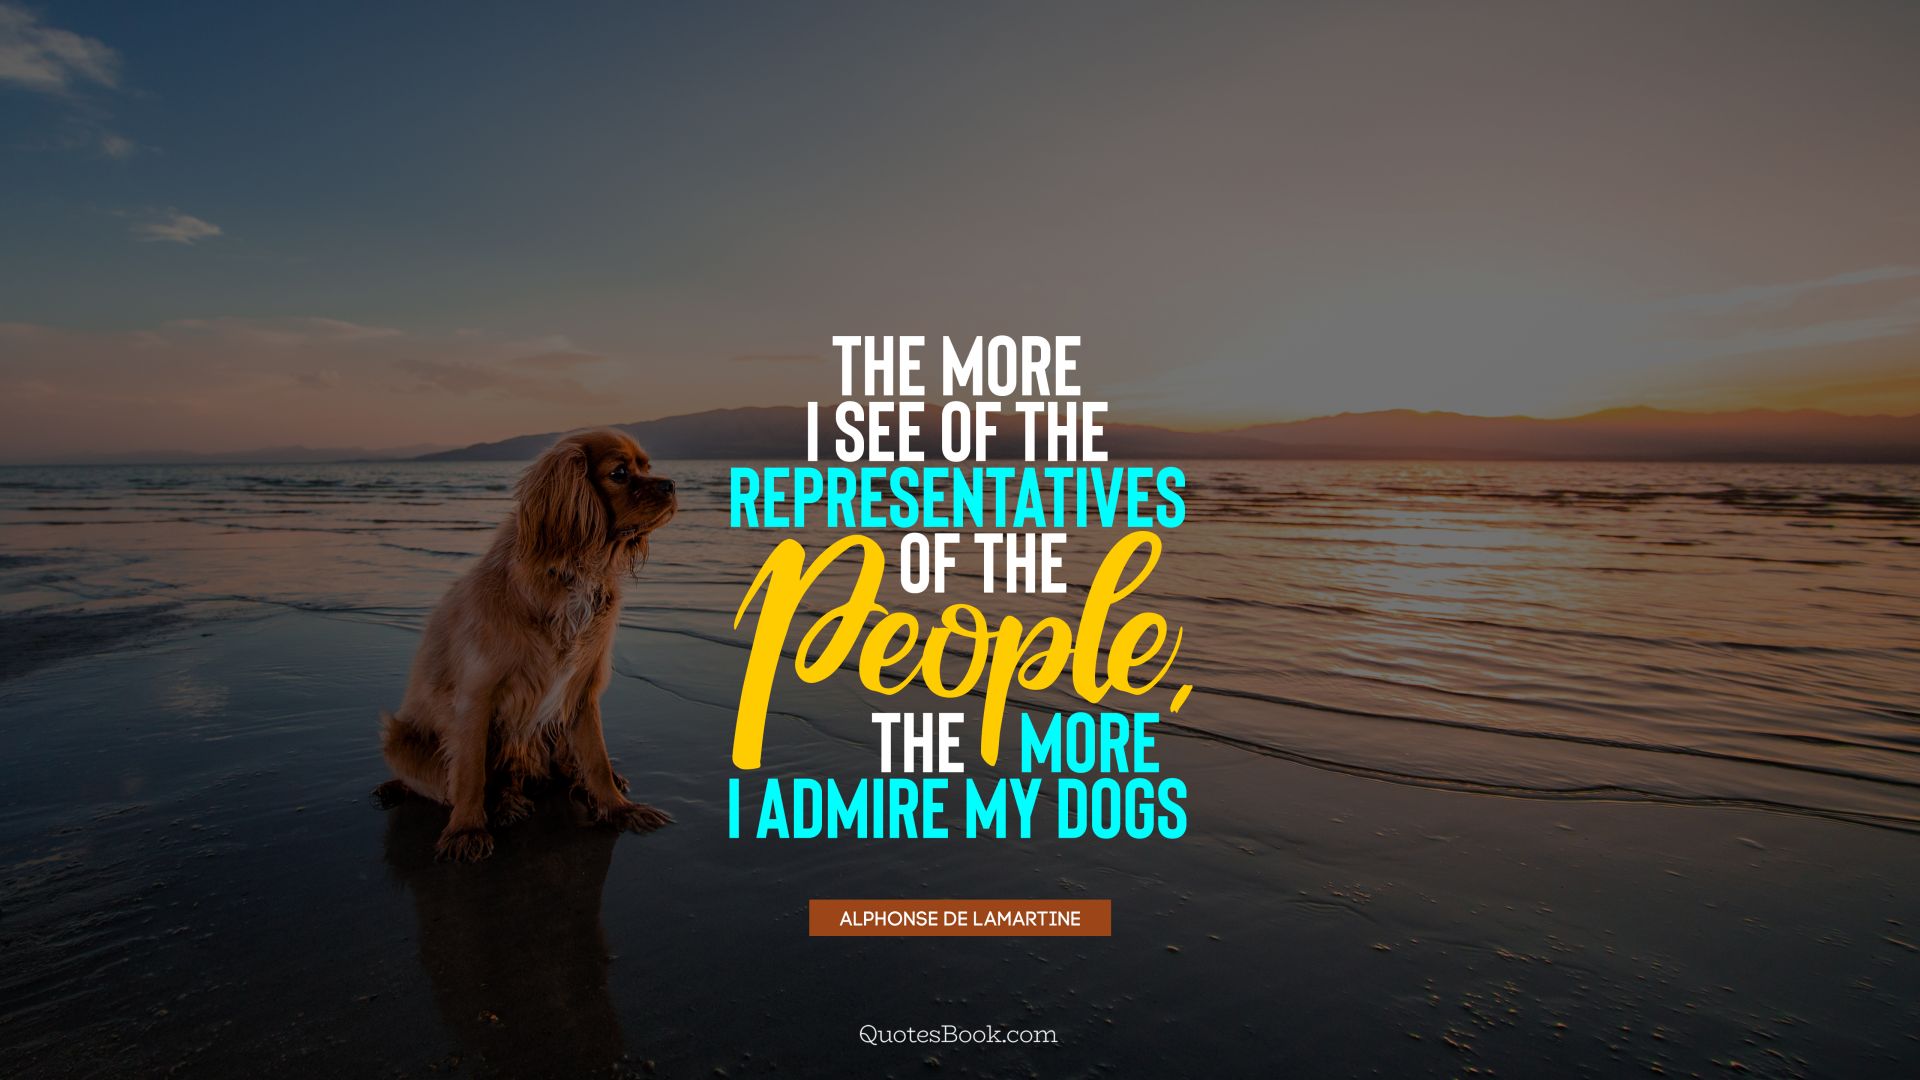 The more I see of the representatives of the people, the more I admire my dogs. - Quote by Alphonse de Lamartine